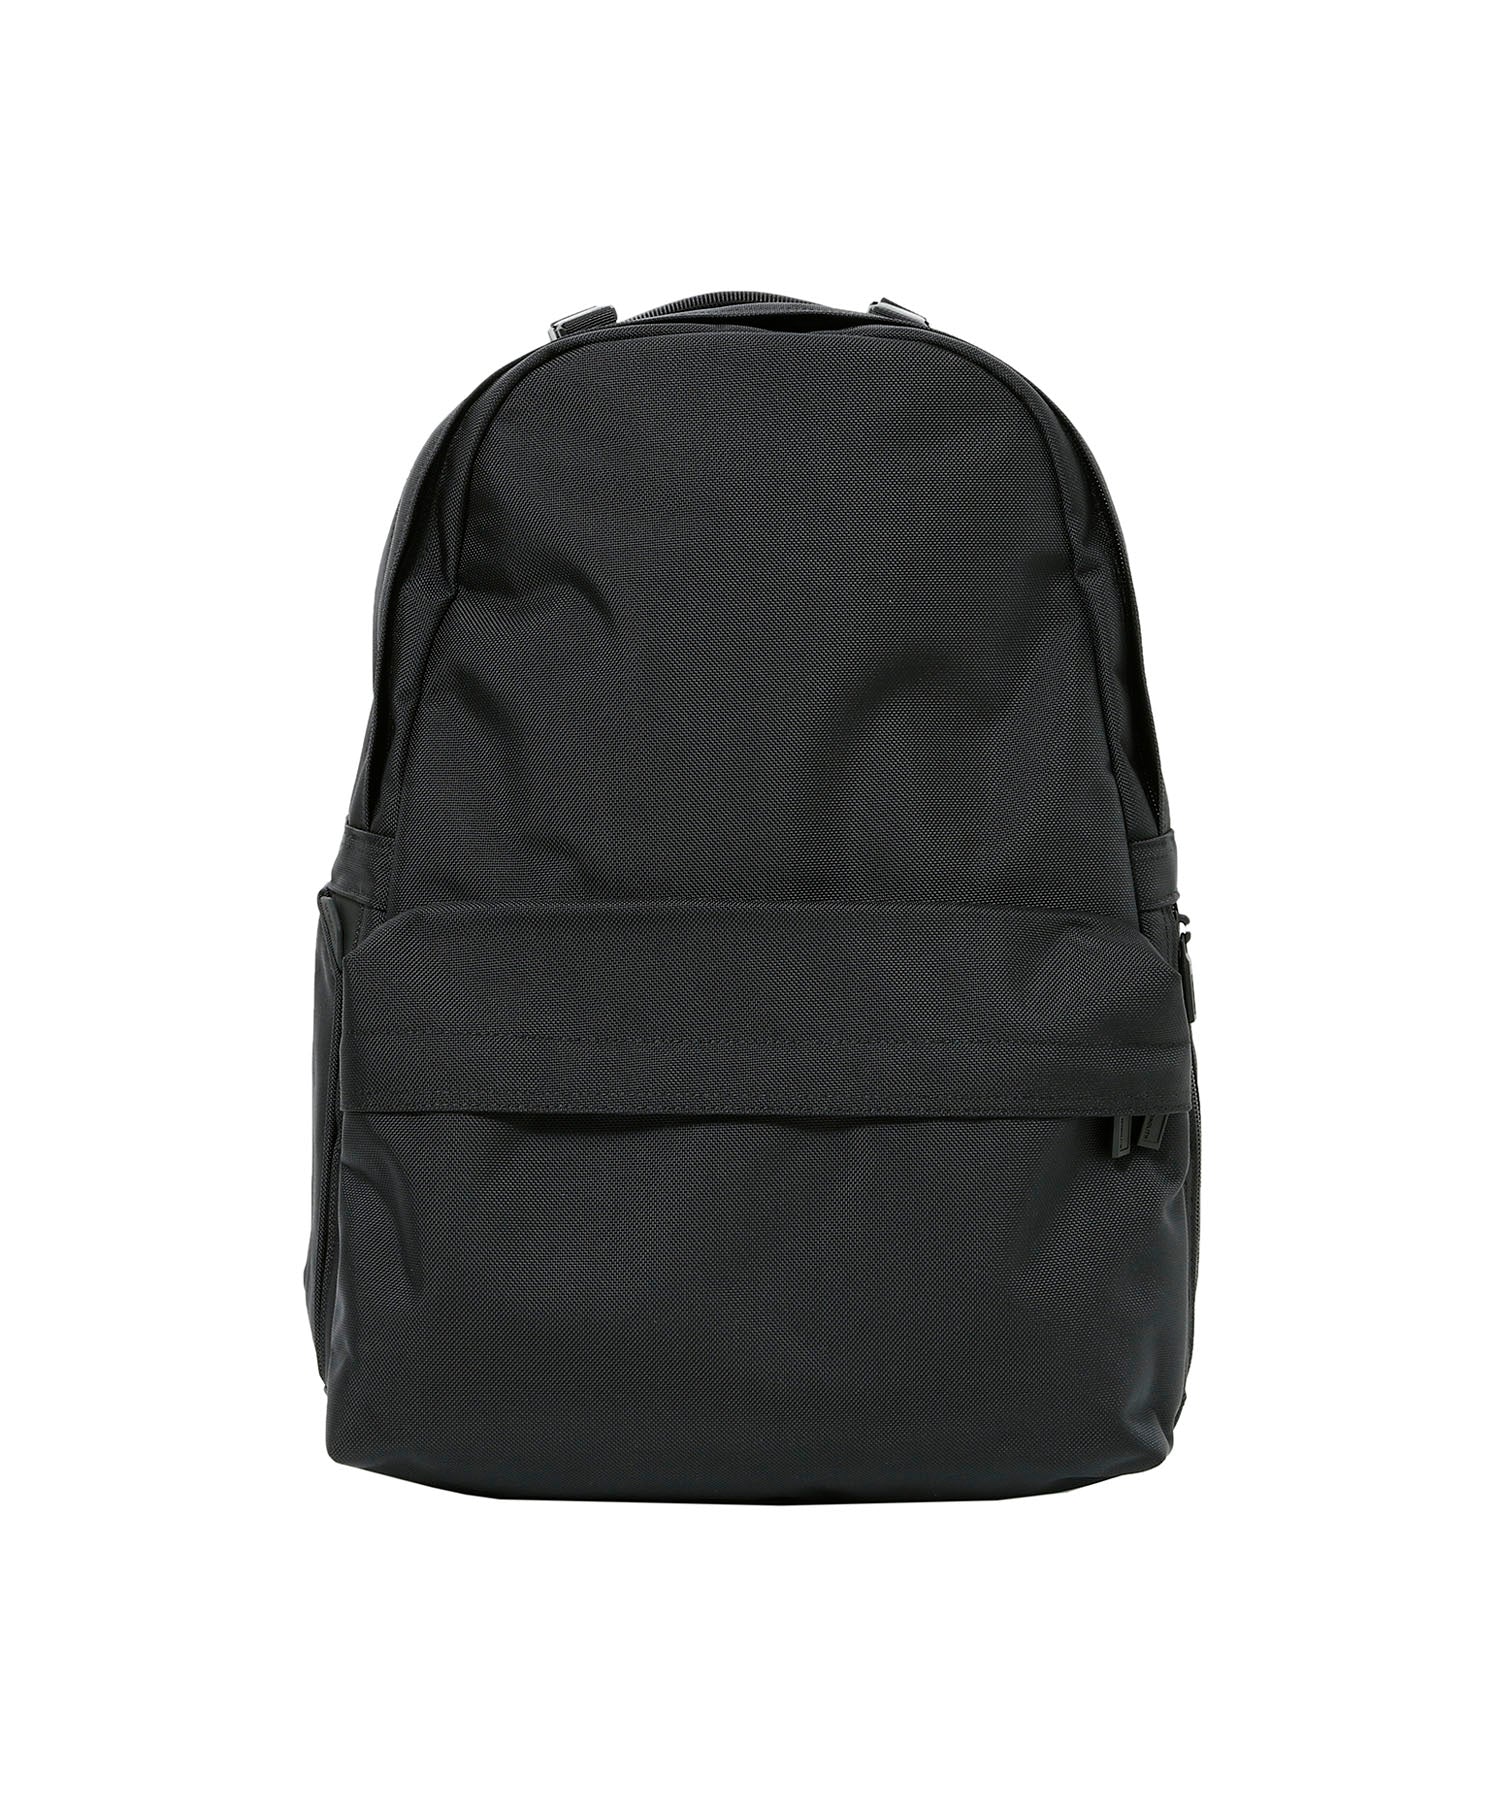 BACKPACK PRO S